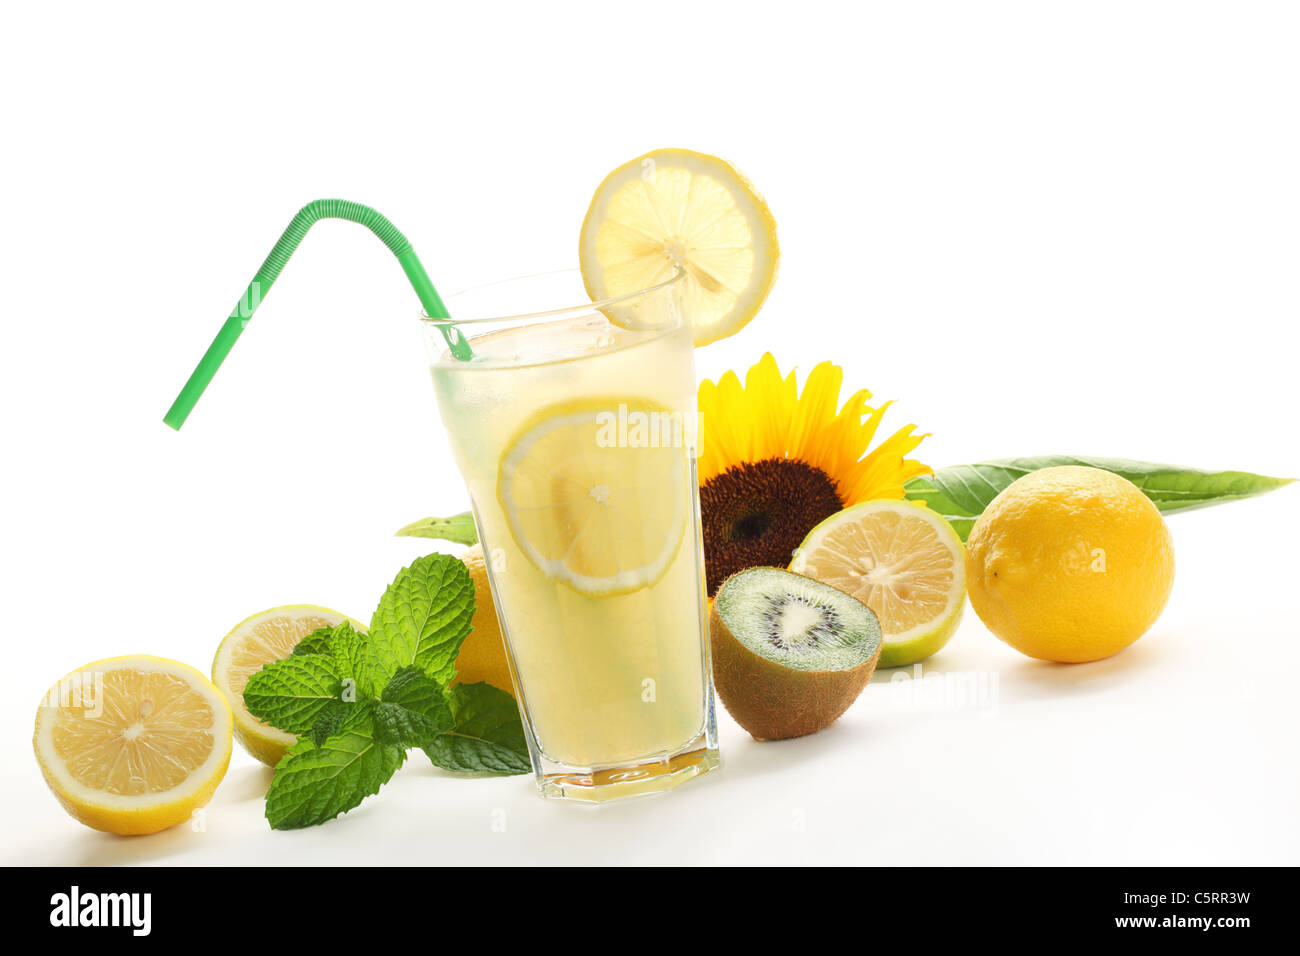 Iced drink with mint, citrus fruit and sunflower. Stock Photo